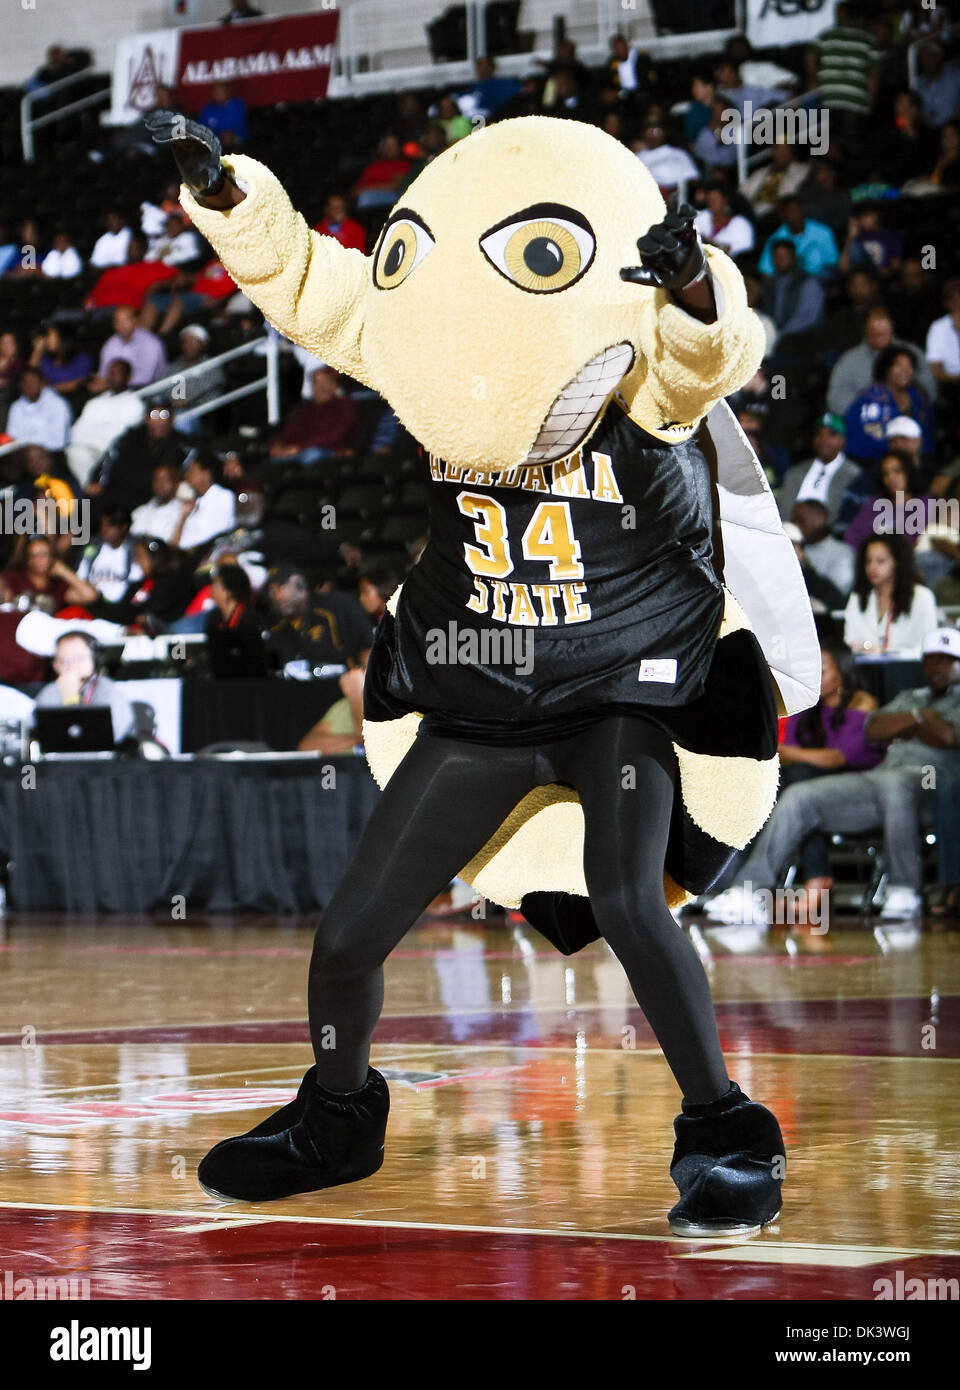 Mar. 12, 2011 - Garland, Texas, United States of America - The Alabama State Hornets mascot in action during the SWAC Championship game between the Alabama State Hornets and the Grambling State Tigers at the Special Events Center in Garland, Texas. Alabama State defeats Grambling State 65 to 48. (Credit Image: © Dan Wozniak/Southcreek Global/ZUMAPRESS.com) Stock Photo